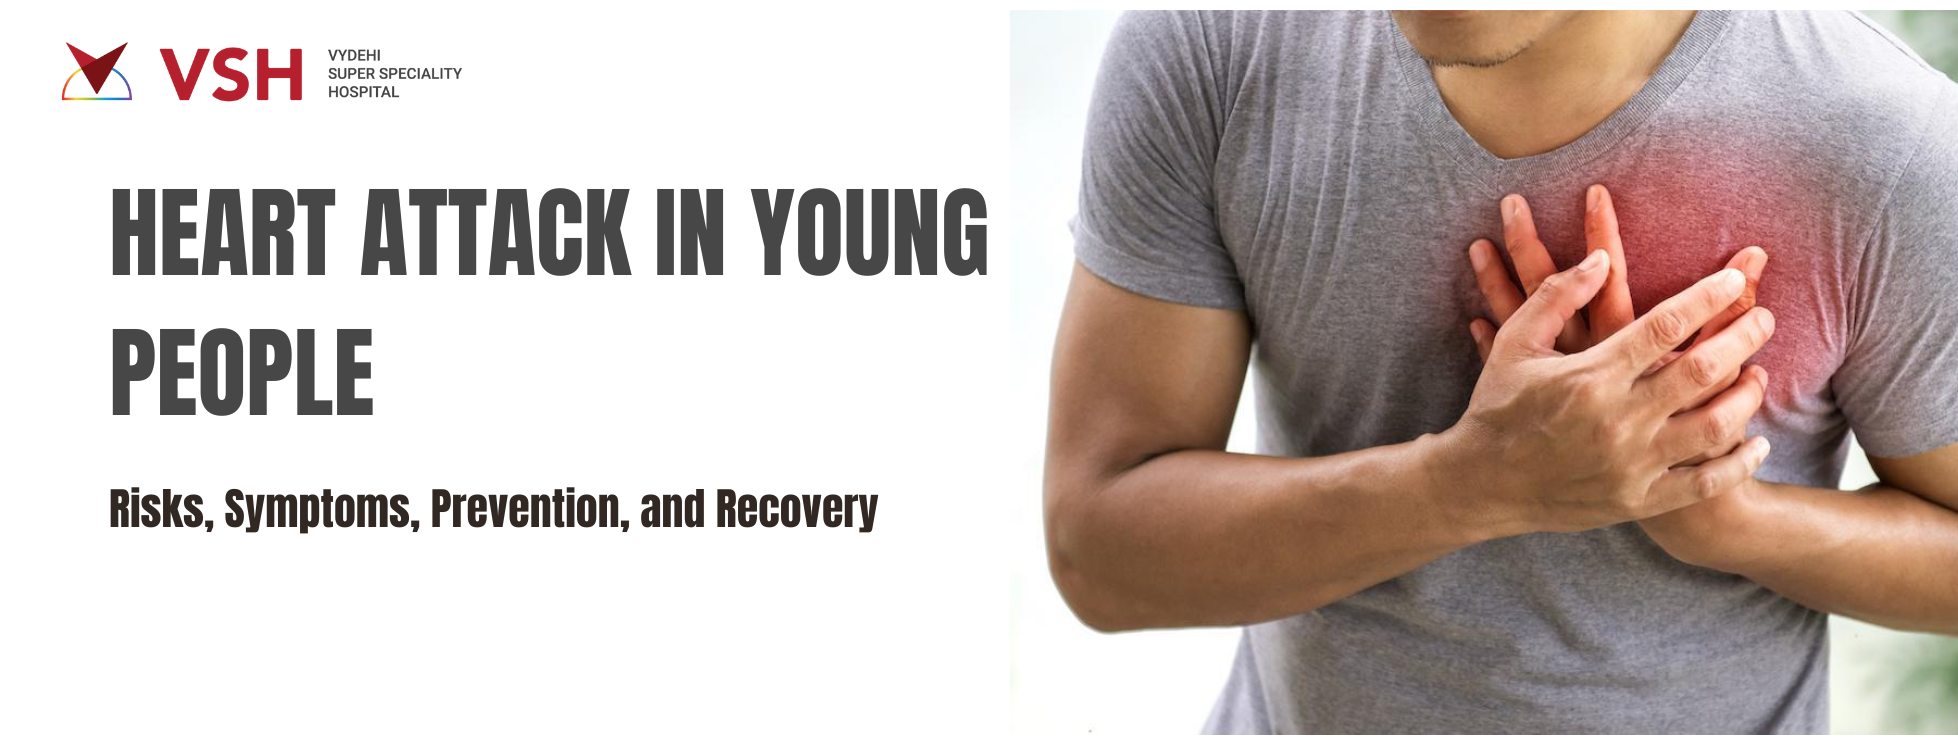 Heart Attack in Young People: Risks, Symptoms, Prevention, and Recovery